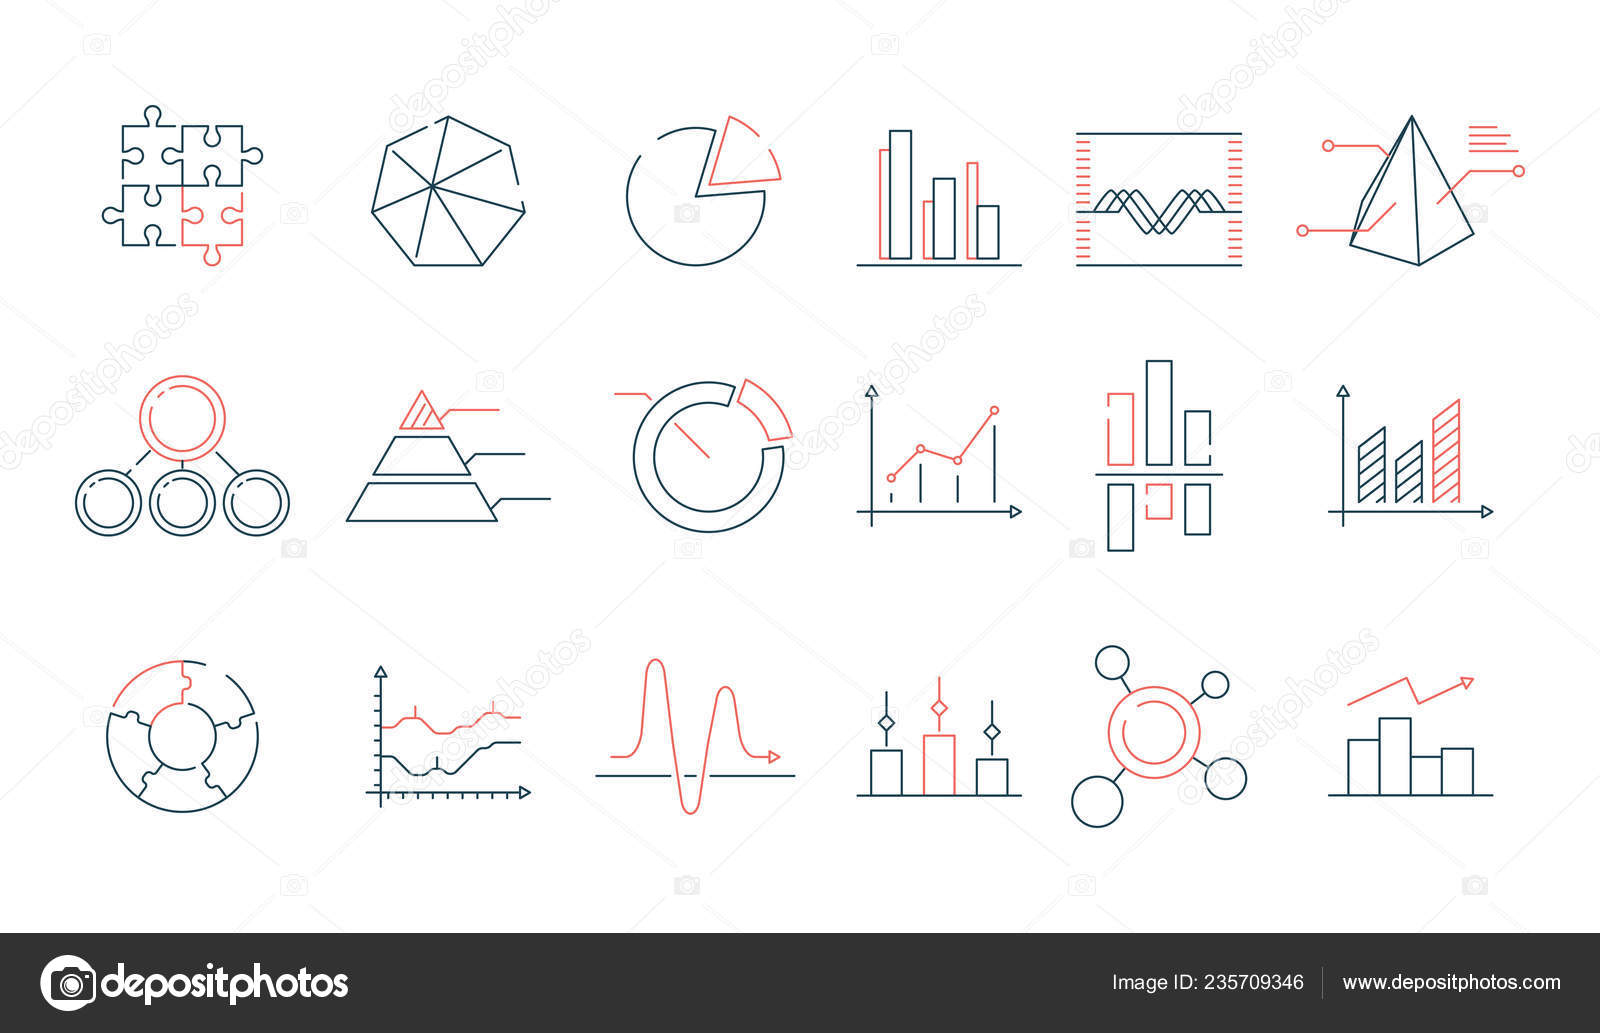 Statistics Symbols And Meanings Chart